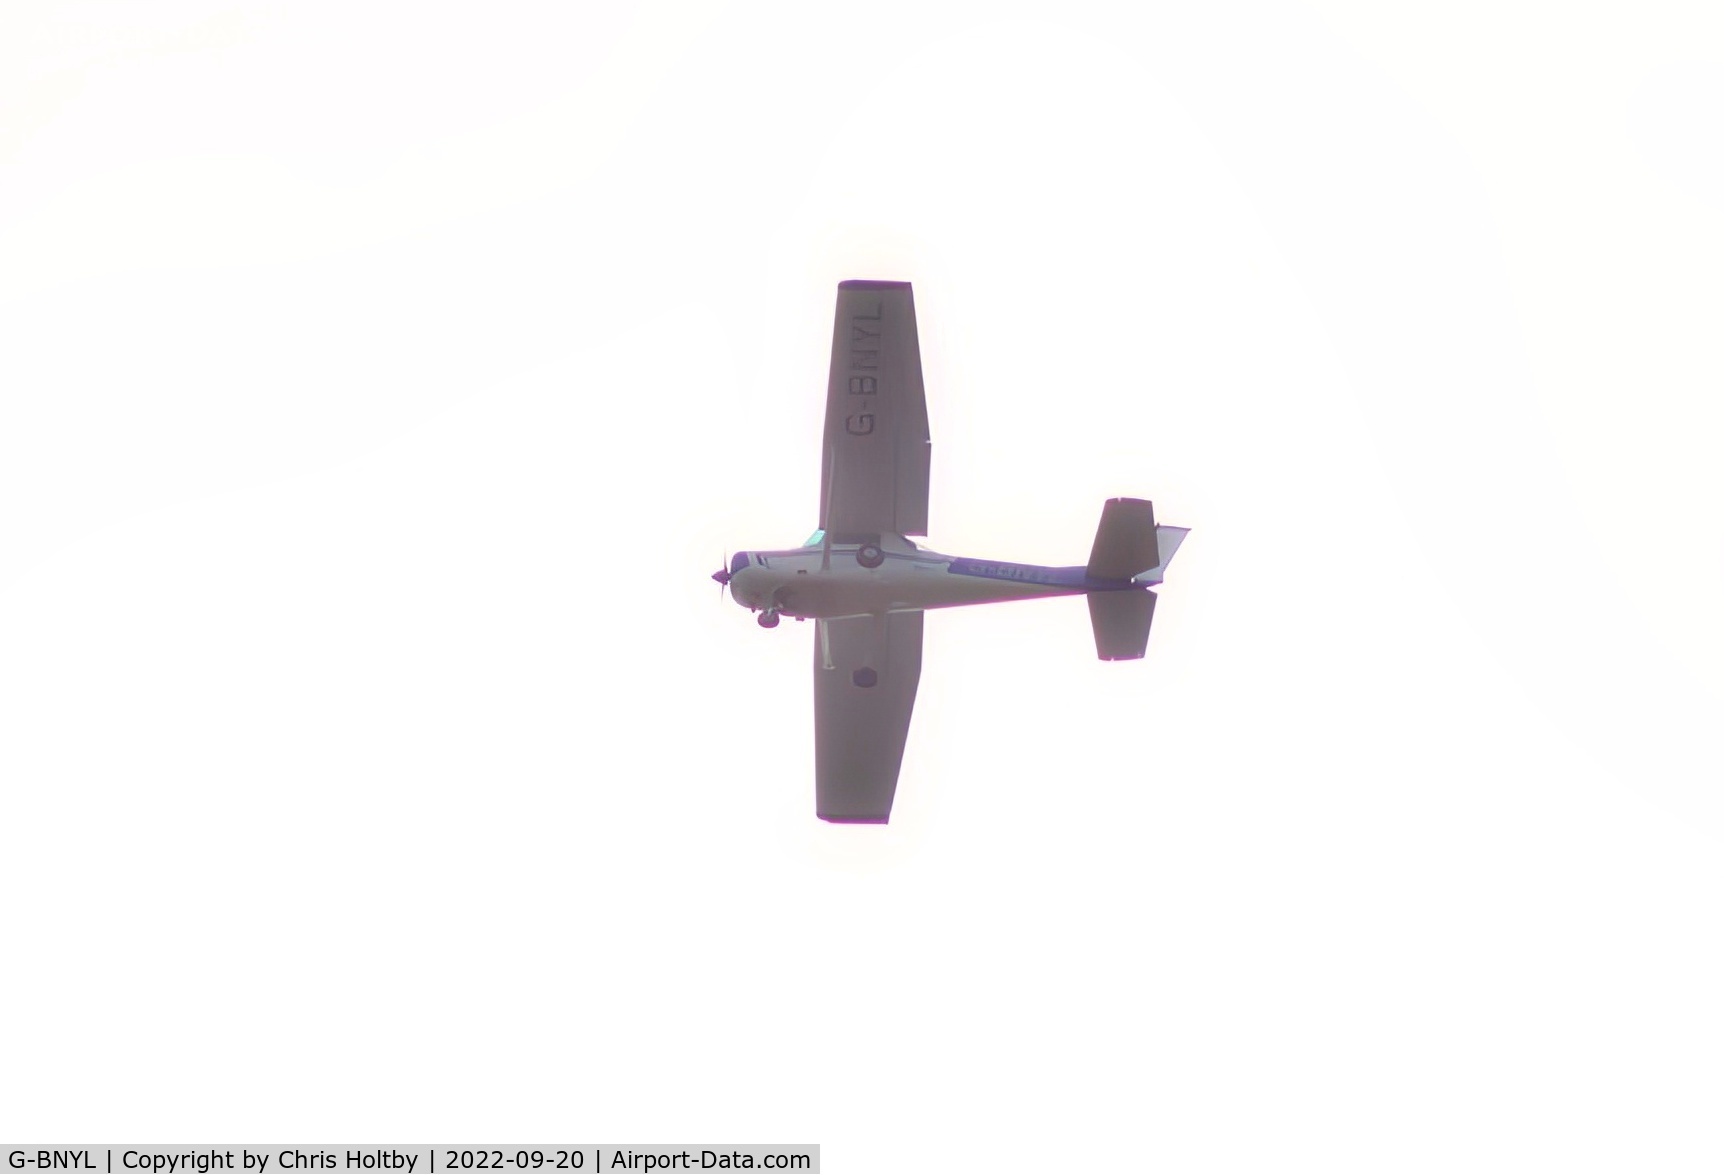 G-BNYL, 1977 Cessna 152 C/N 152-80671, Over Worthing, Sussex in change of livery